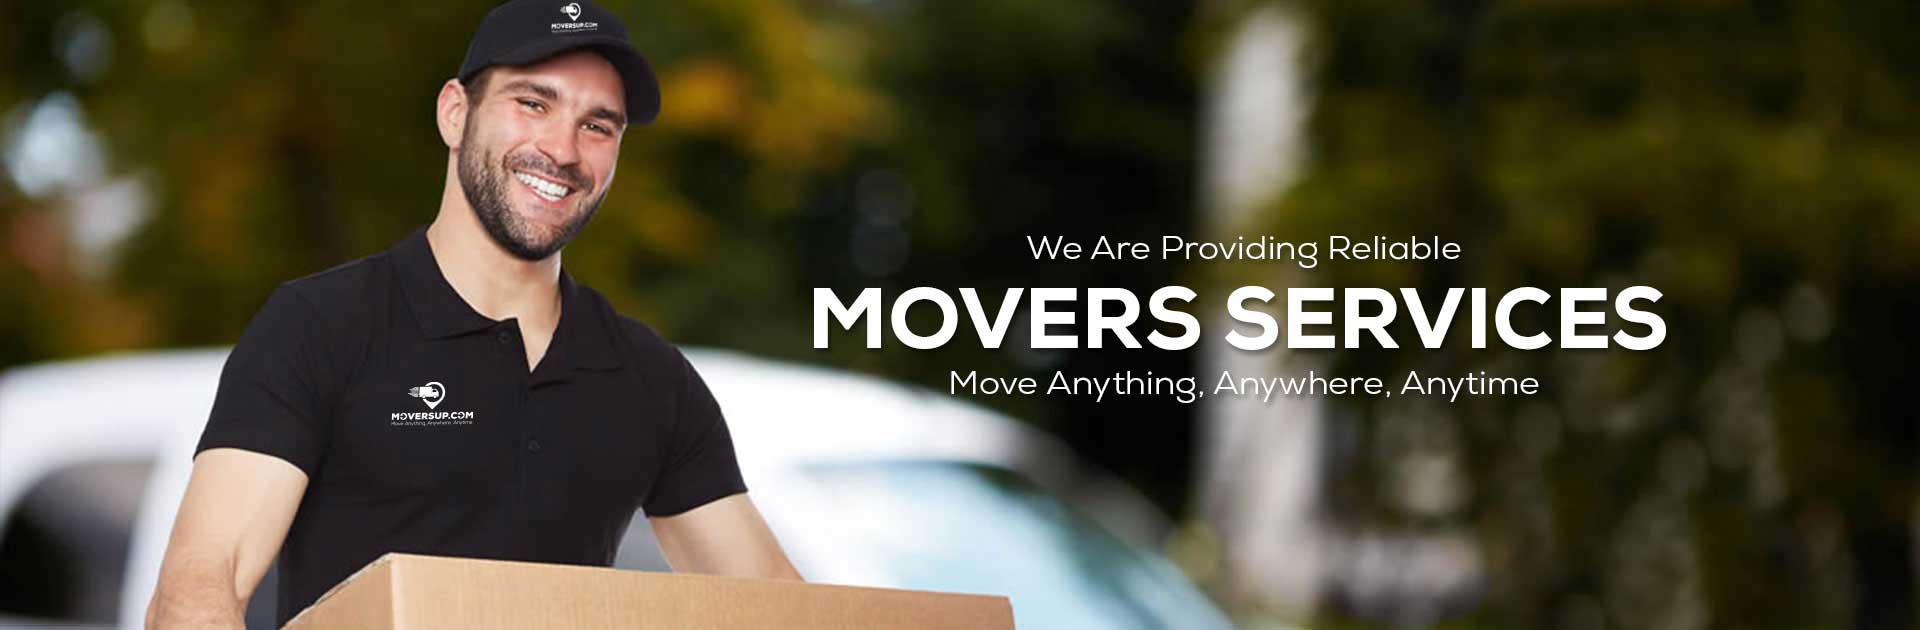 House Movers and Packers in Sharjah